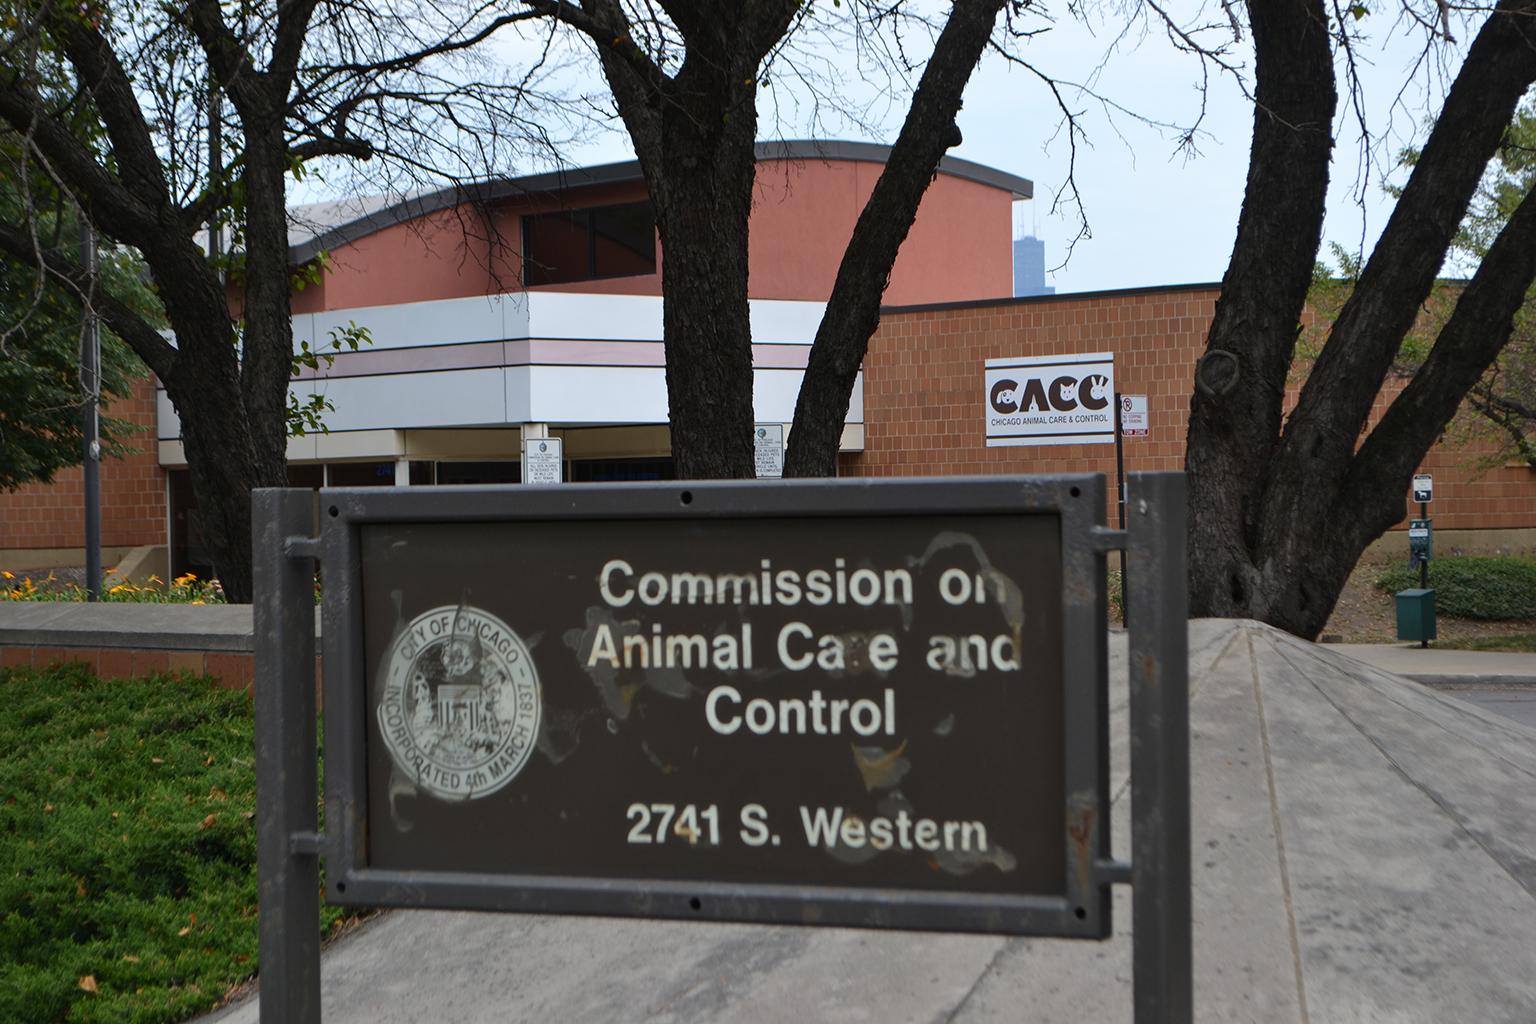 Chicago Animal Care and Control, 2741 S. Western Ave. (Alex Ruppenthal / Chicago Tonight)